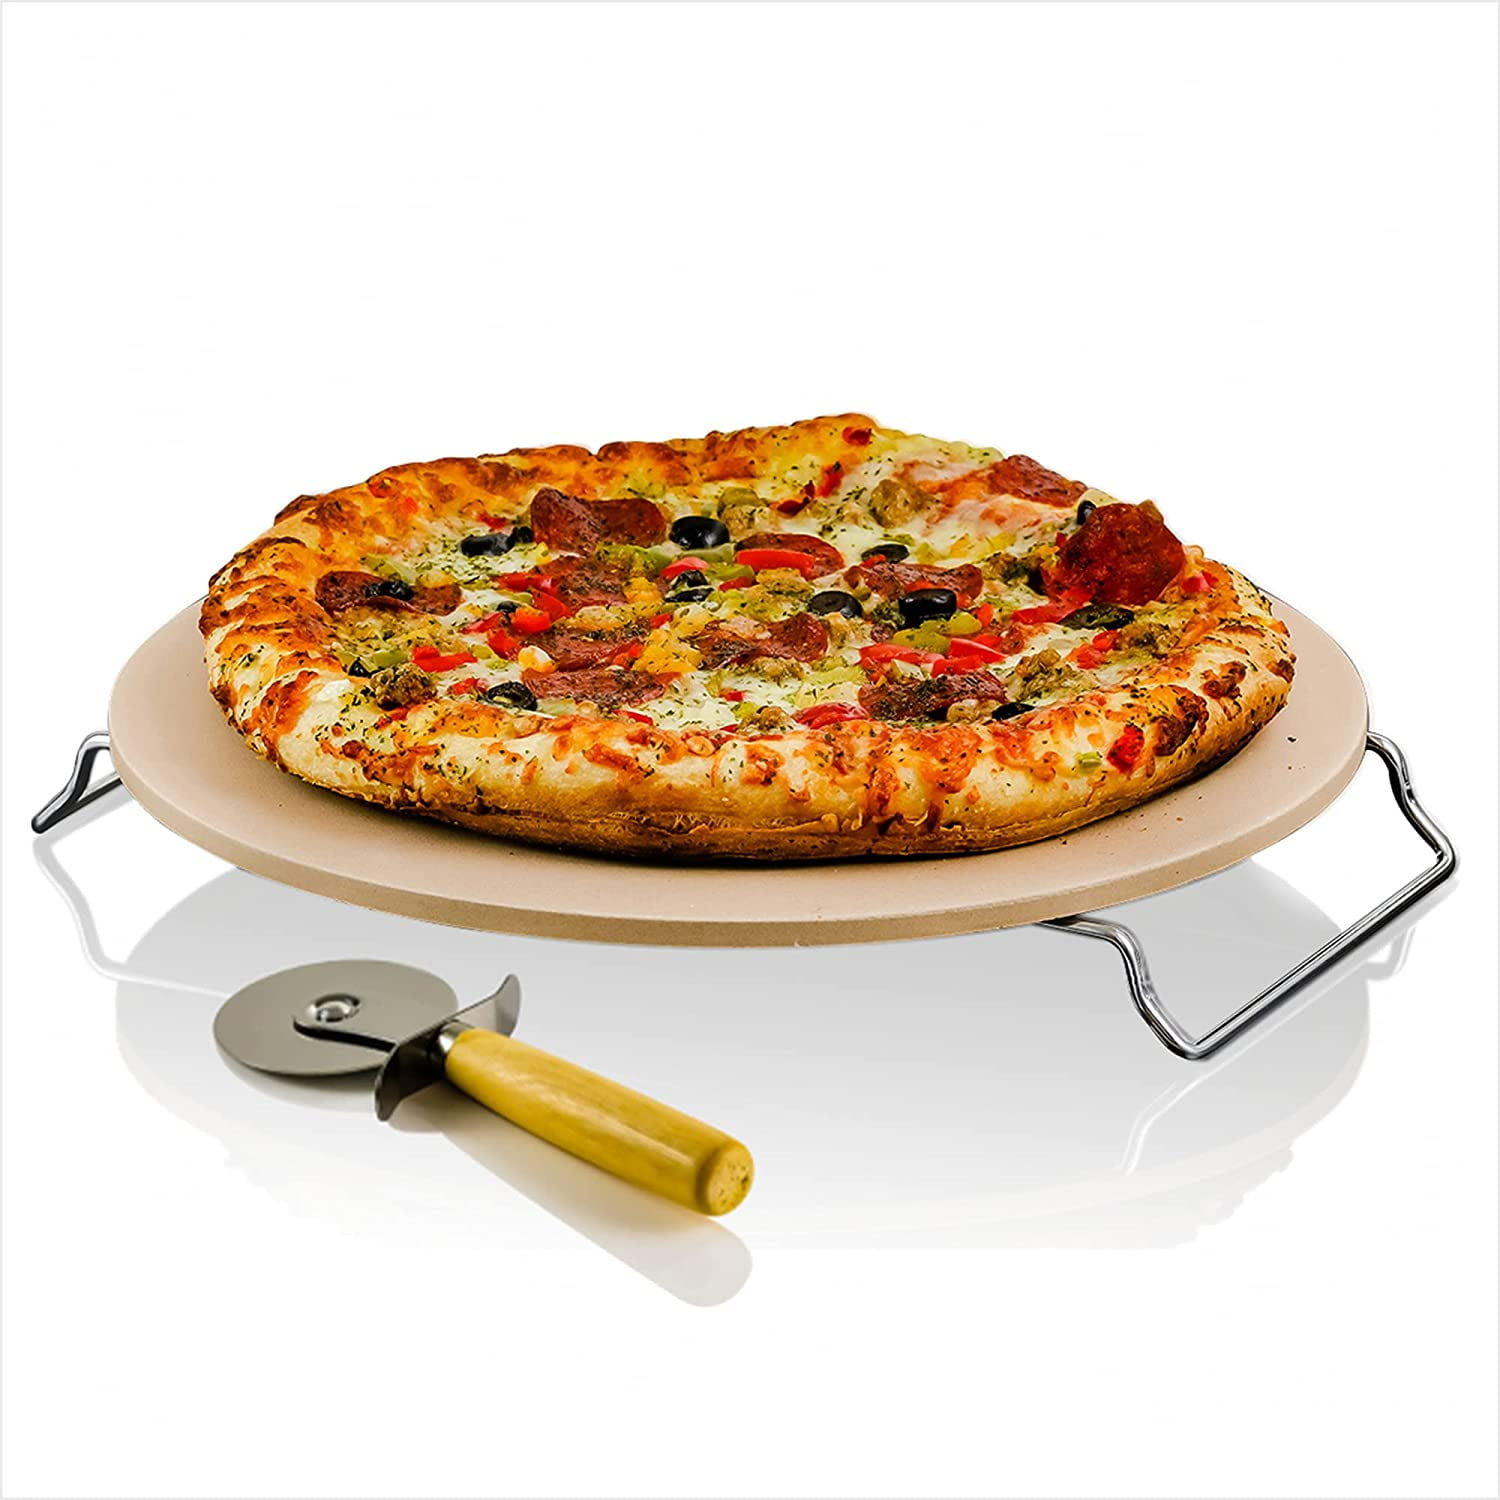 Durable and Safe Cookies and More Large Grilling Pizza Plate 38cm Round Baking Stone for Pizza Thermal Shock Resistant Heavy Duty Cordierite Stone for Oven and BBQ Unicook Pizza Stone Bread